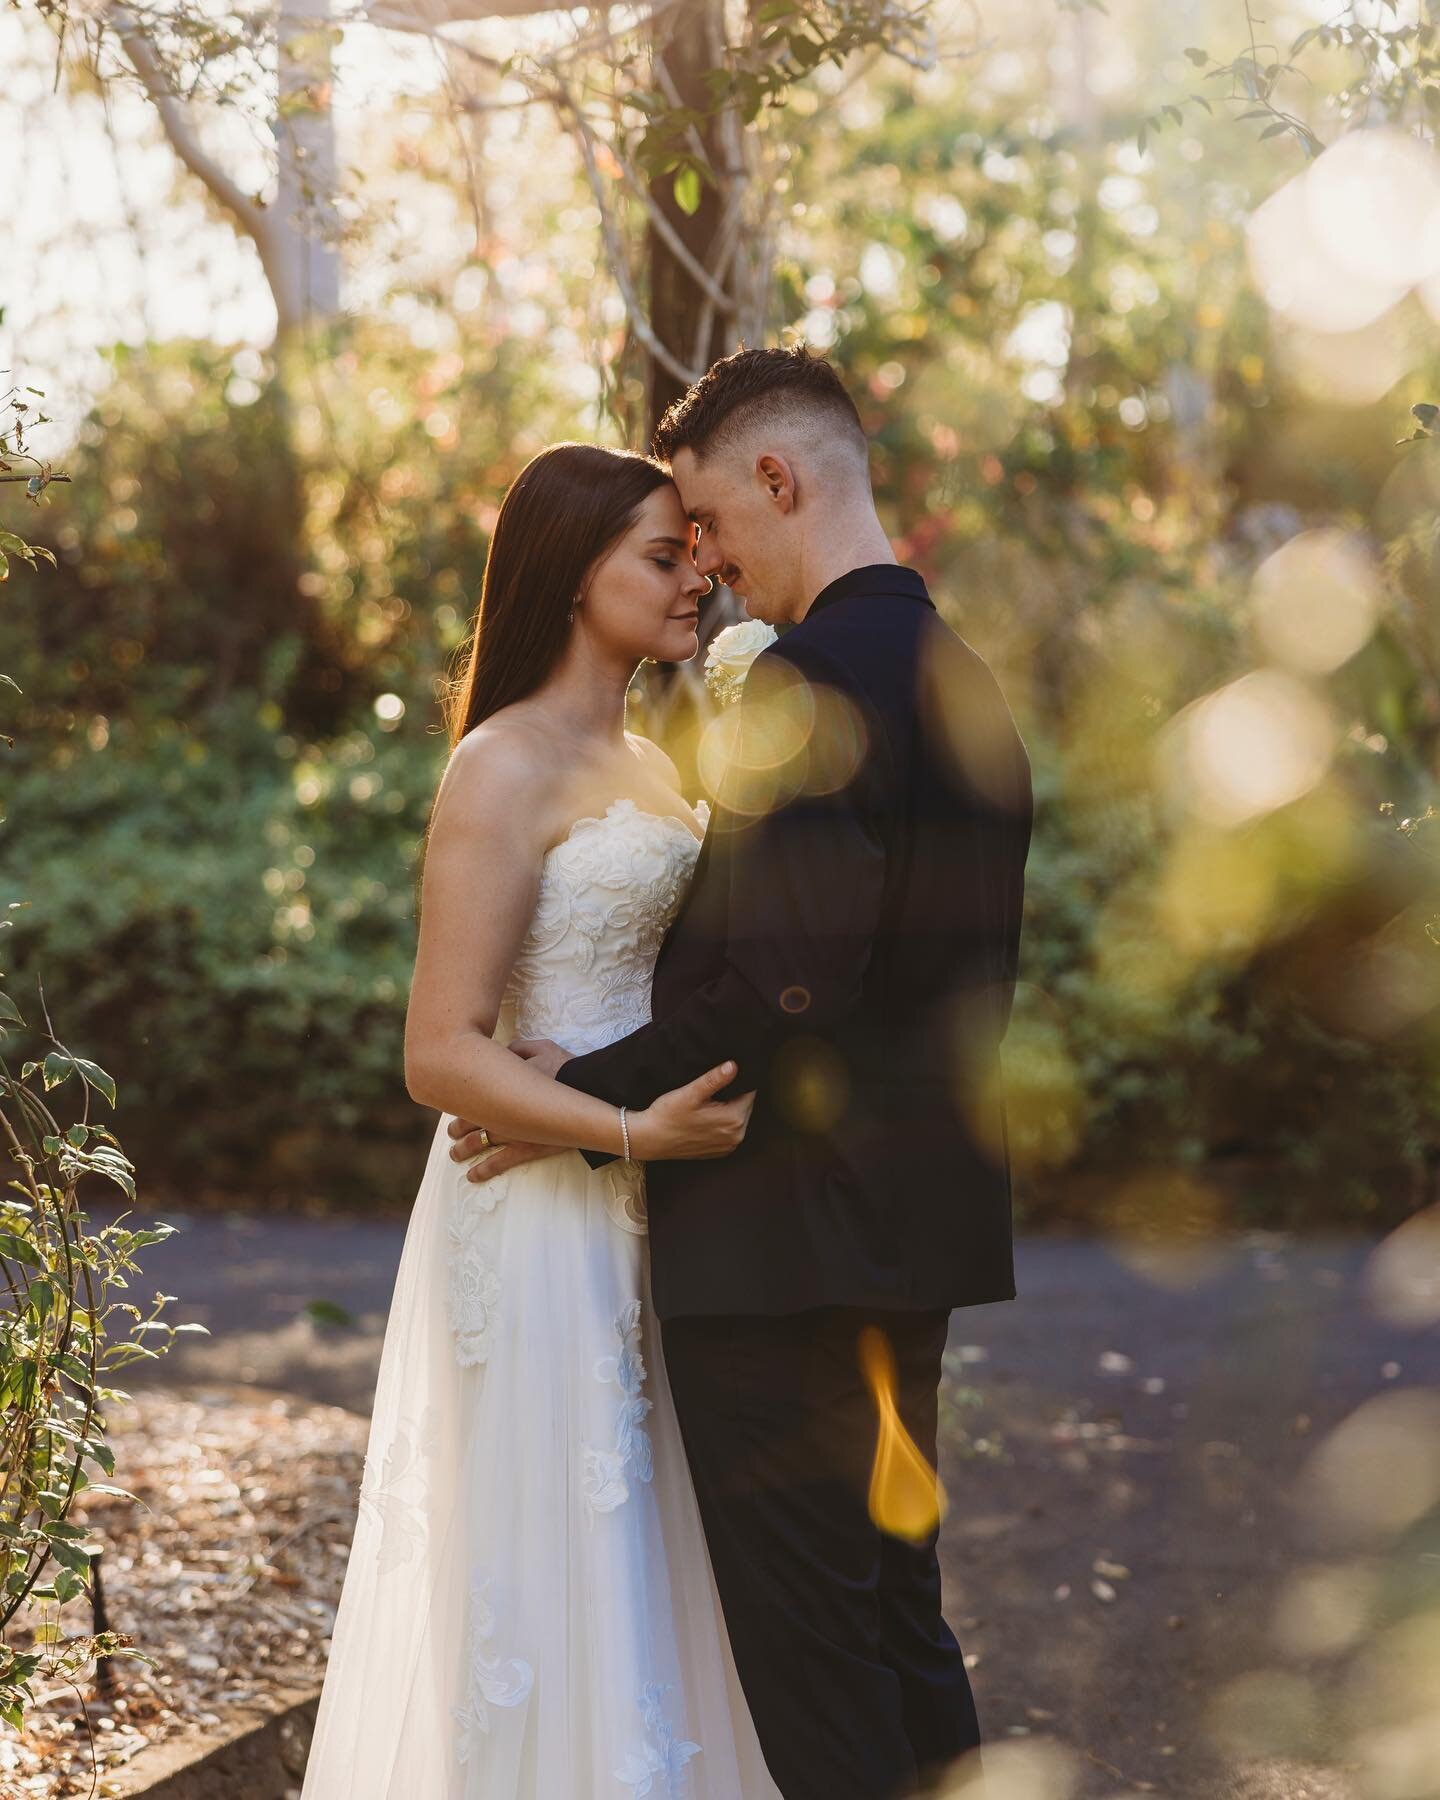 Noosa Botanic Gardens Elopement 💫
Congratulations to Elizabeth &amp; Tony 🤍
Team 👇
@noosaheadscelebrant
@leahcohenphotography 
@makeup_by_marlies 
Styling &amp; Coordination by us 🌹